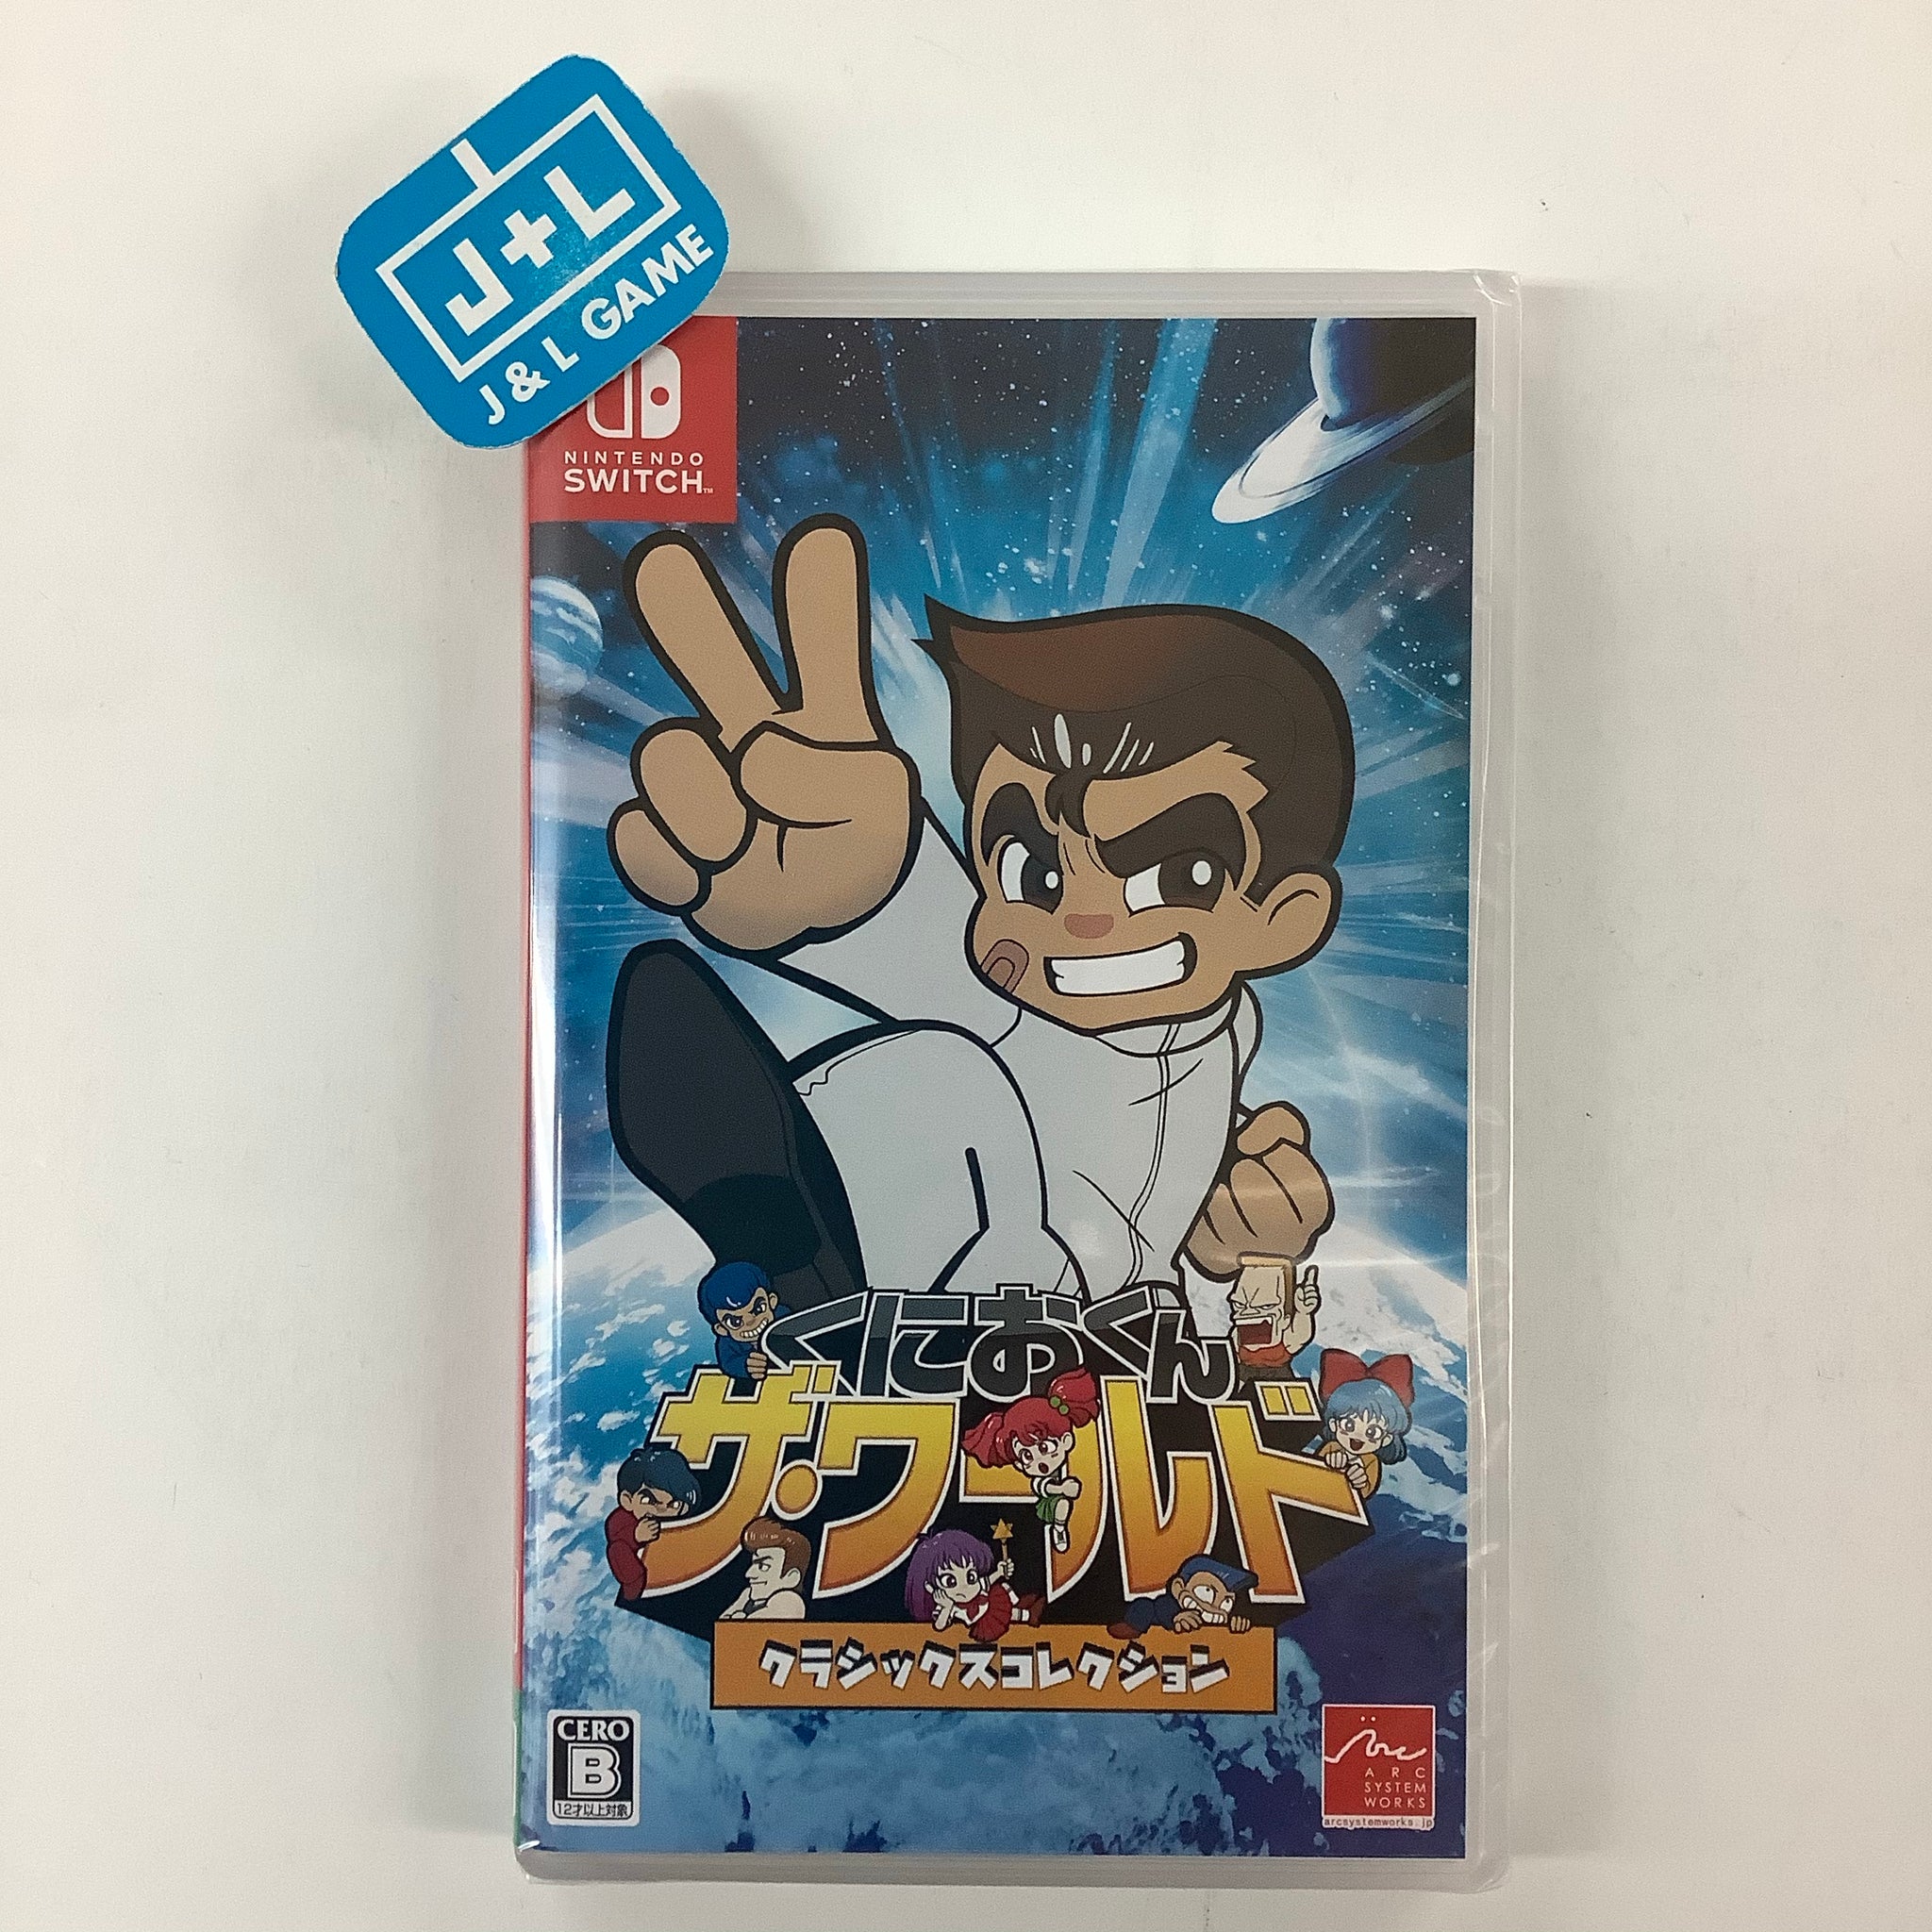 NEW ARRIVED << . NSW Nintendo Switch Double Dragon Collection Chi